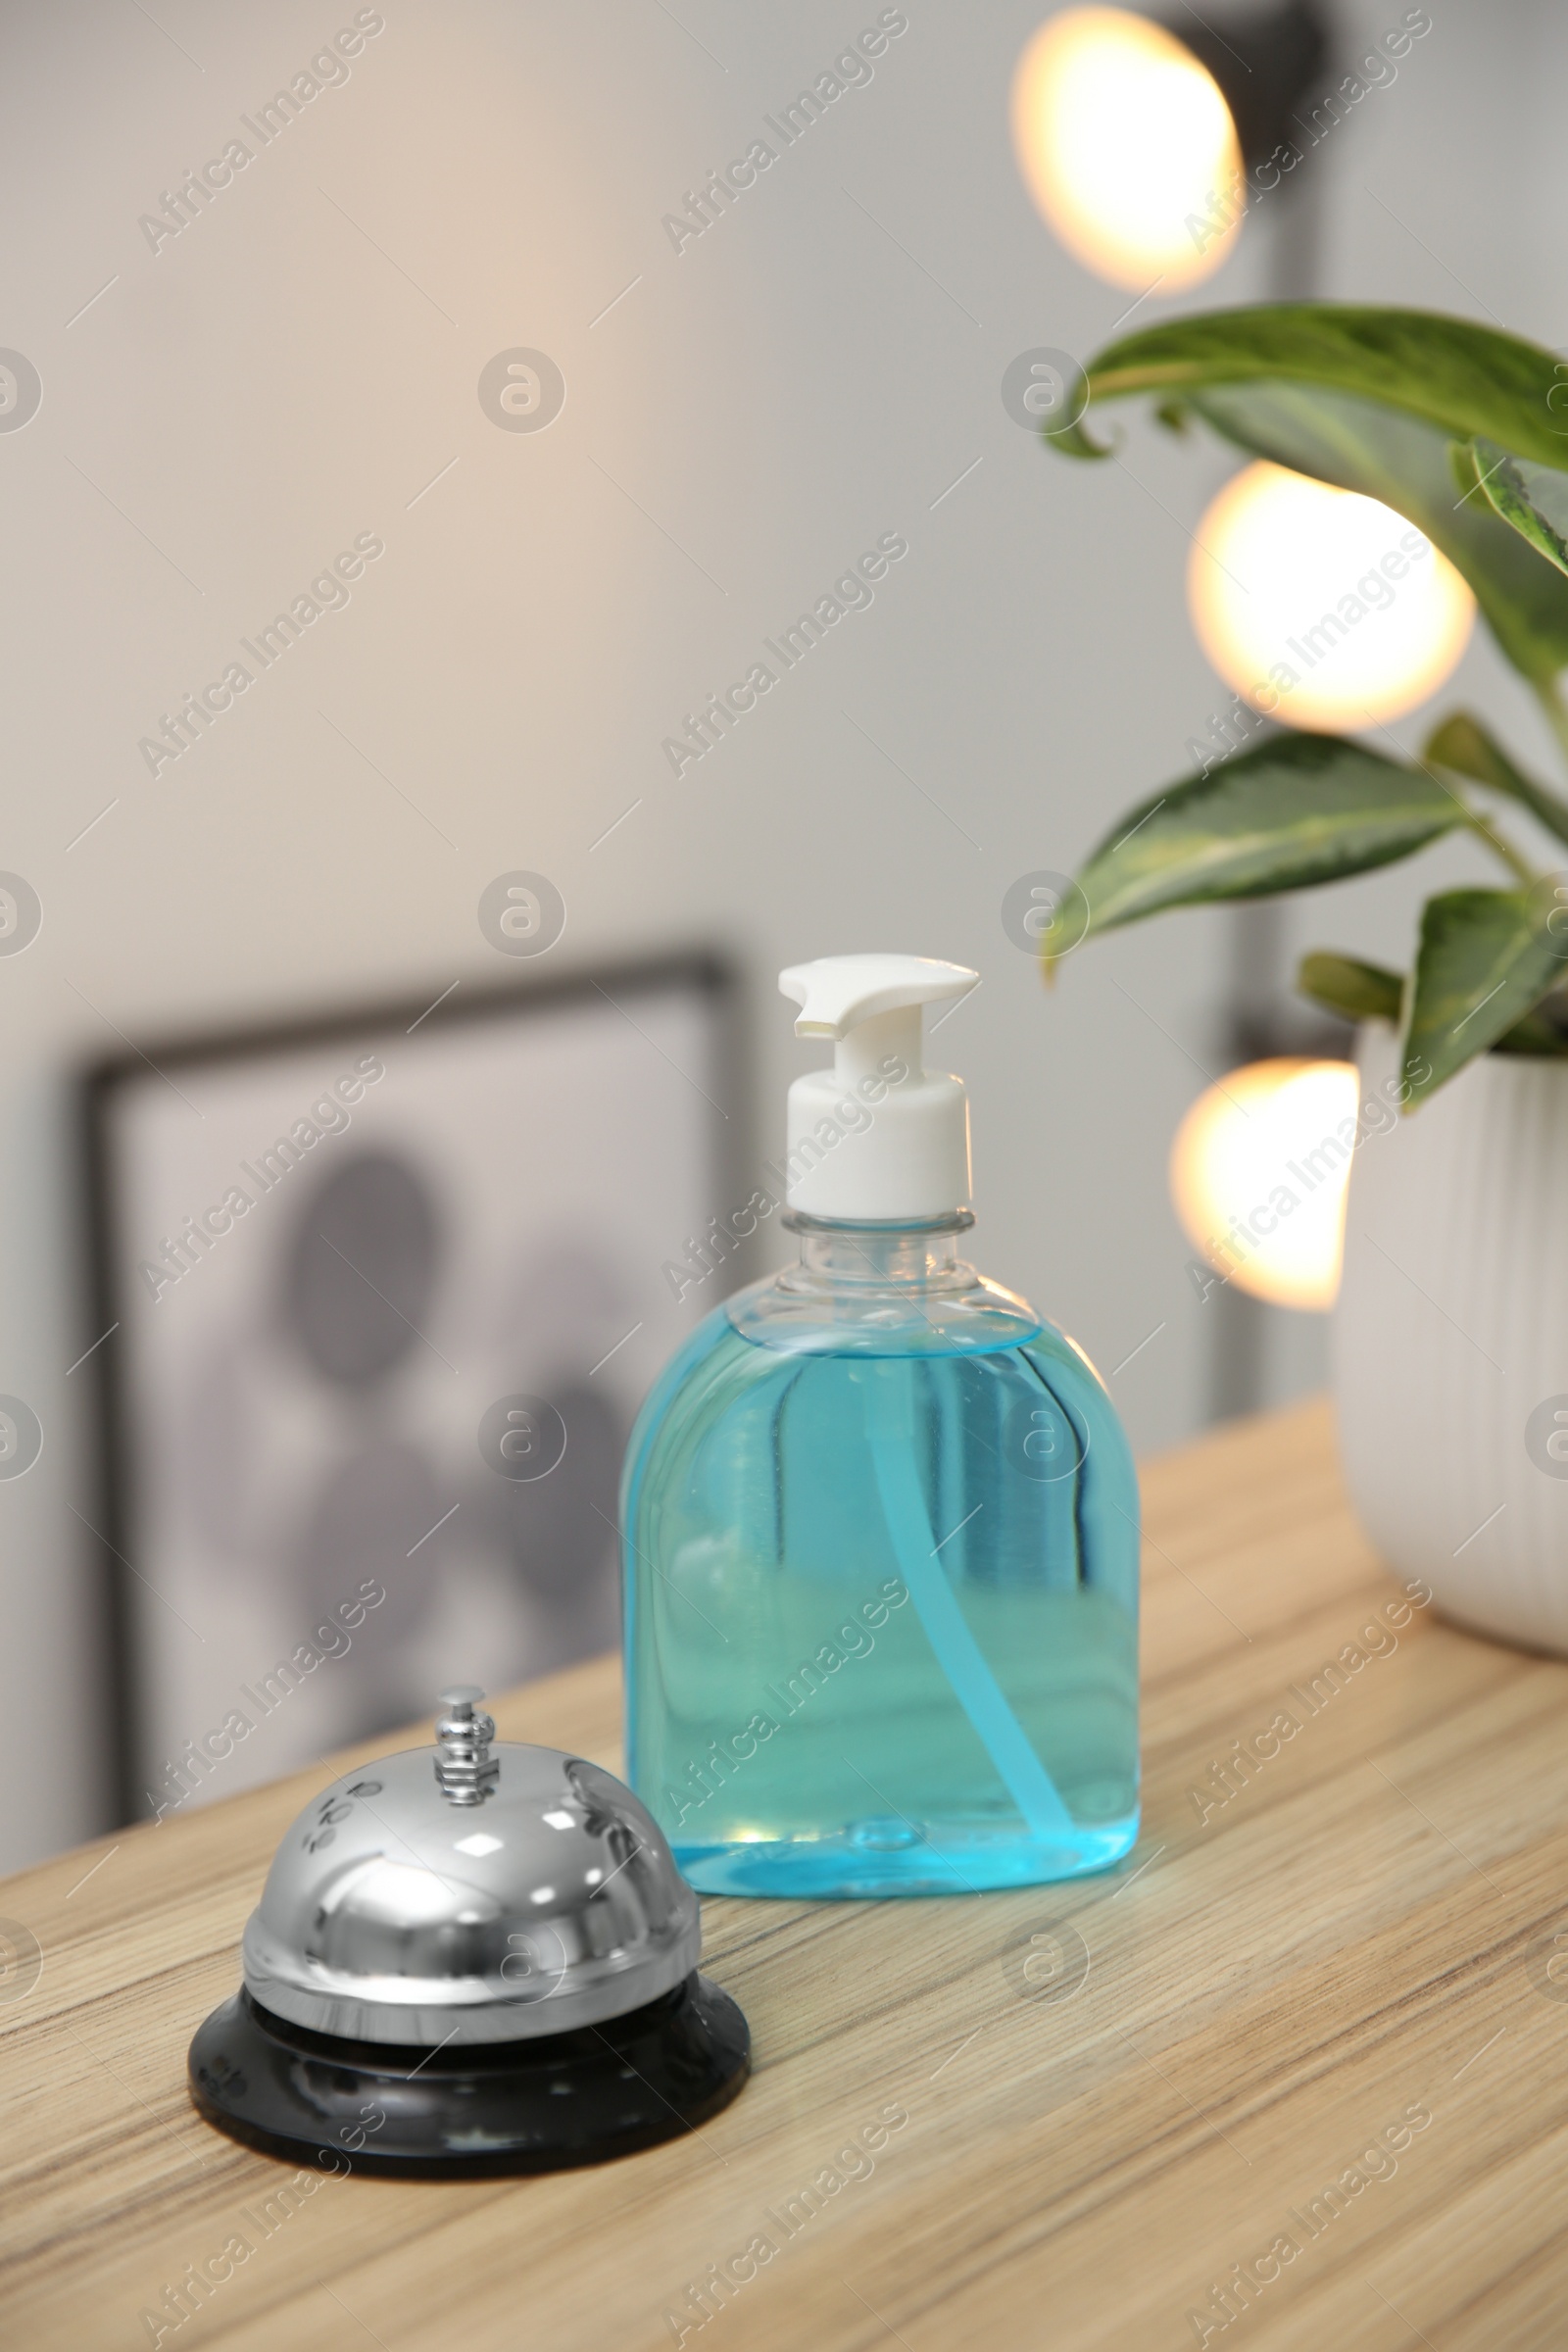 Photo of Dispenser bottle of antiseptic gel and service bell on reception desk in hotel